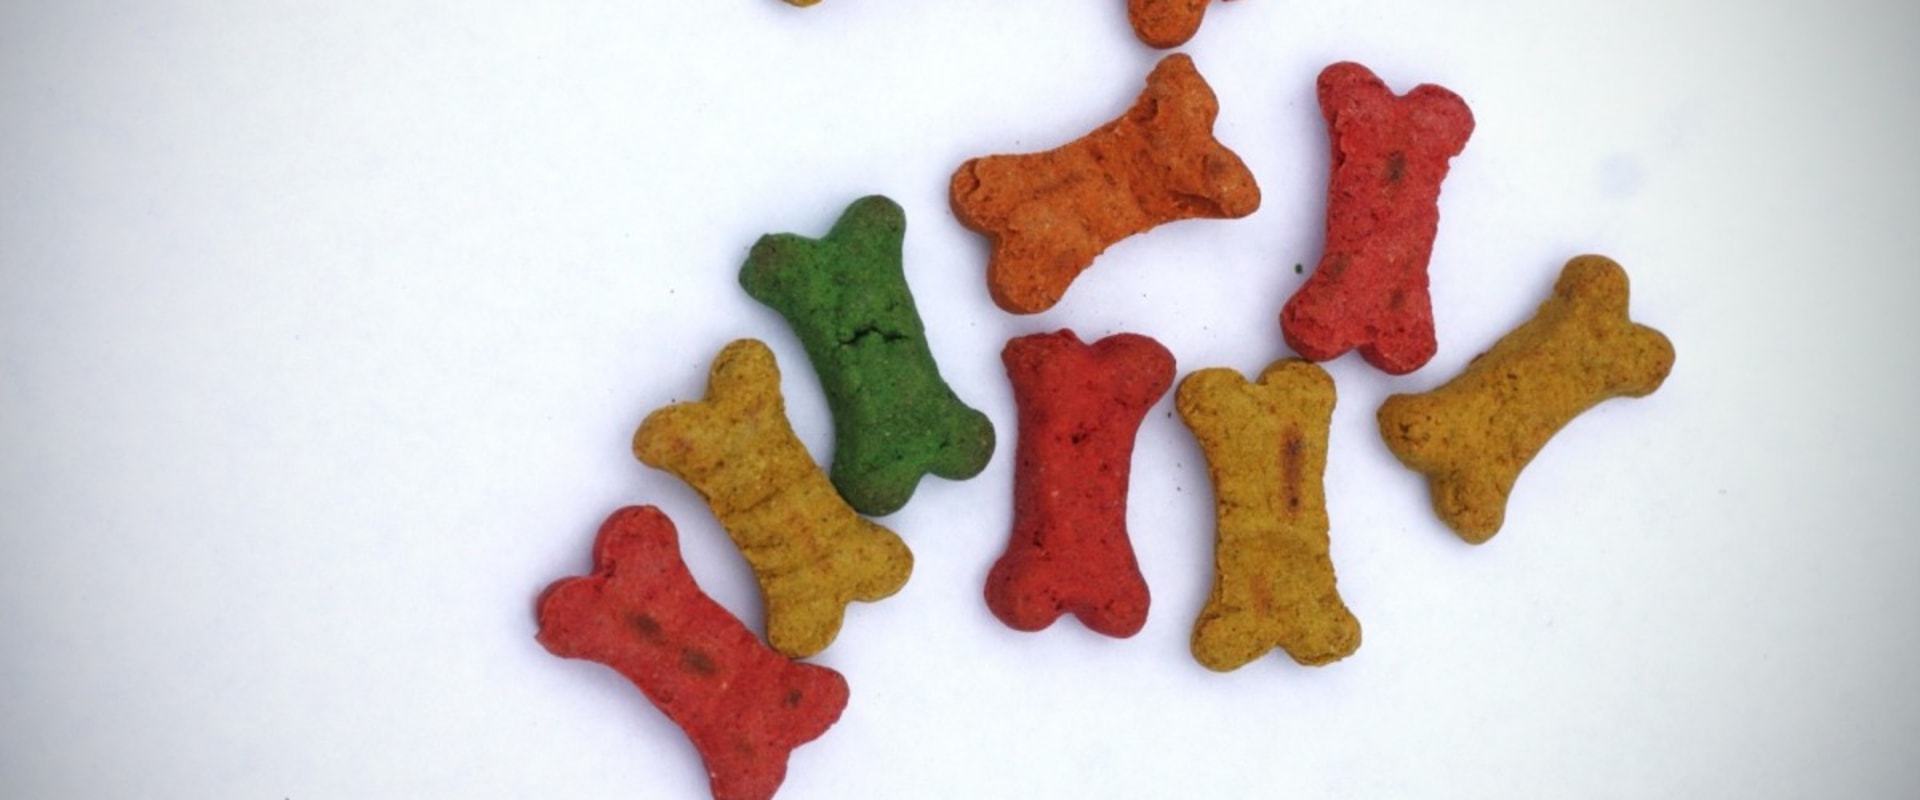 What jerky treats are bad for dogs?